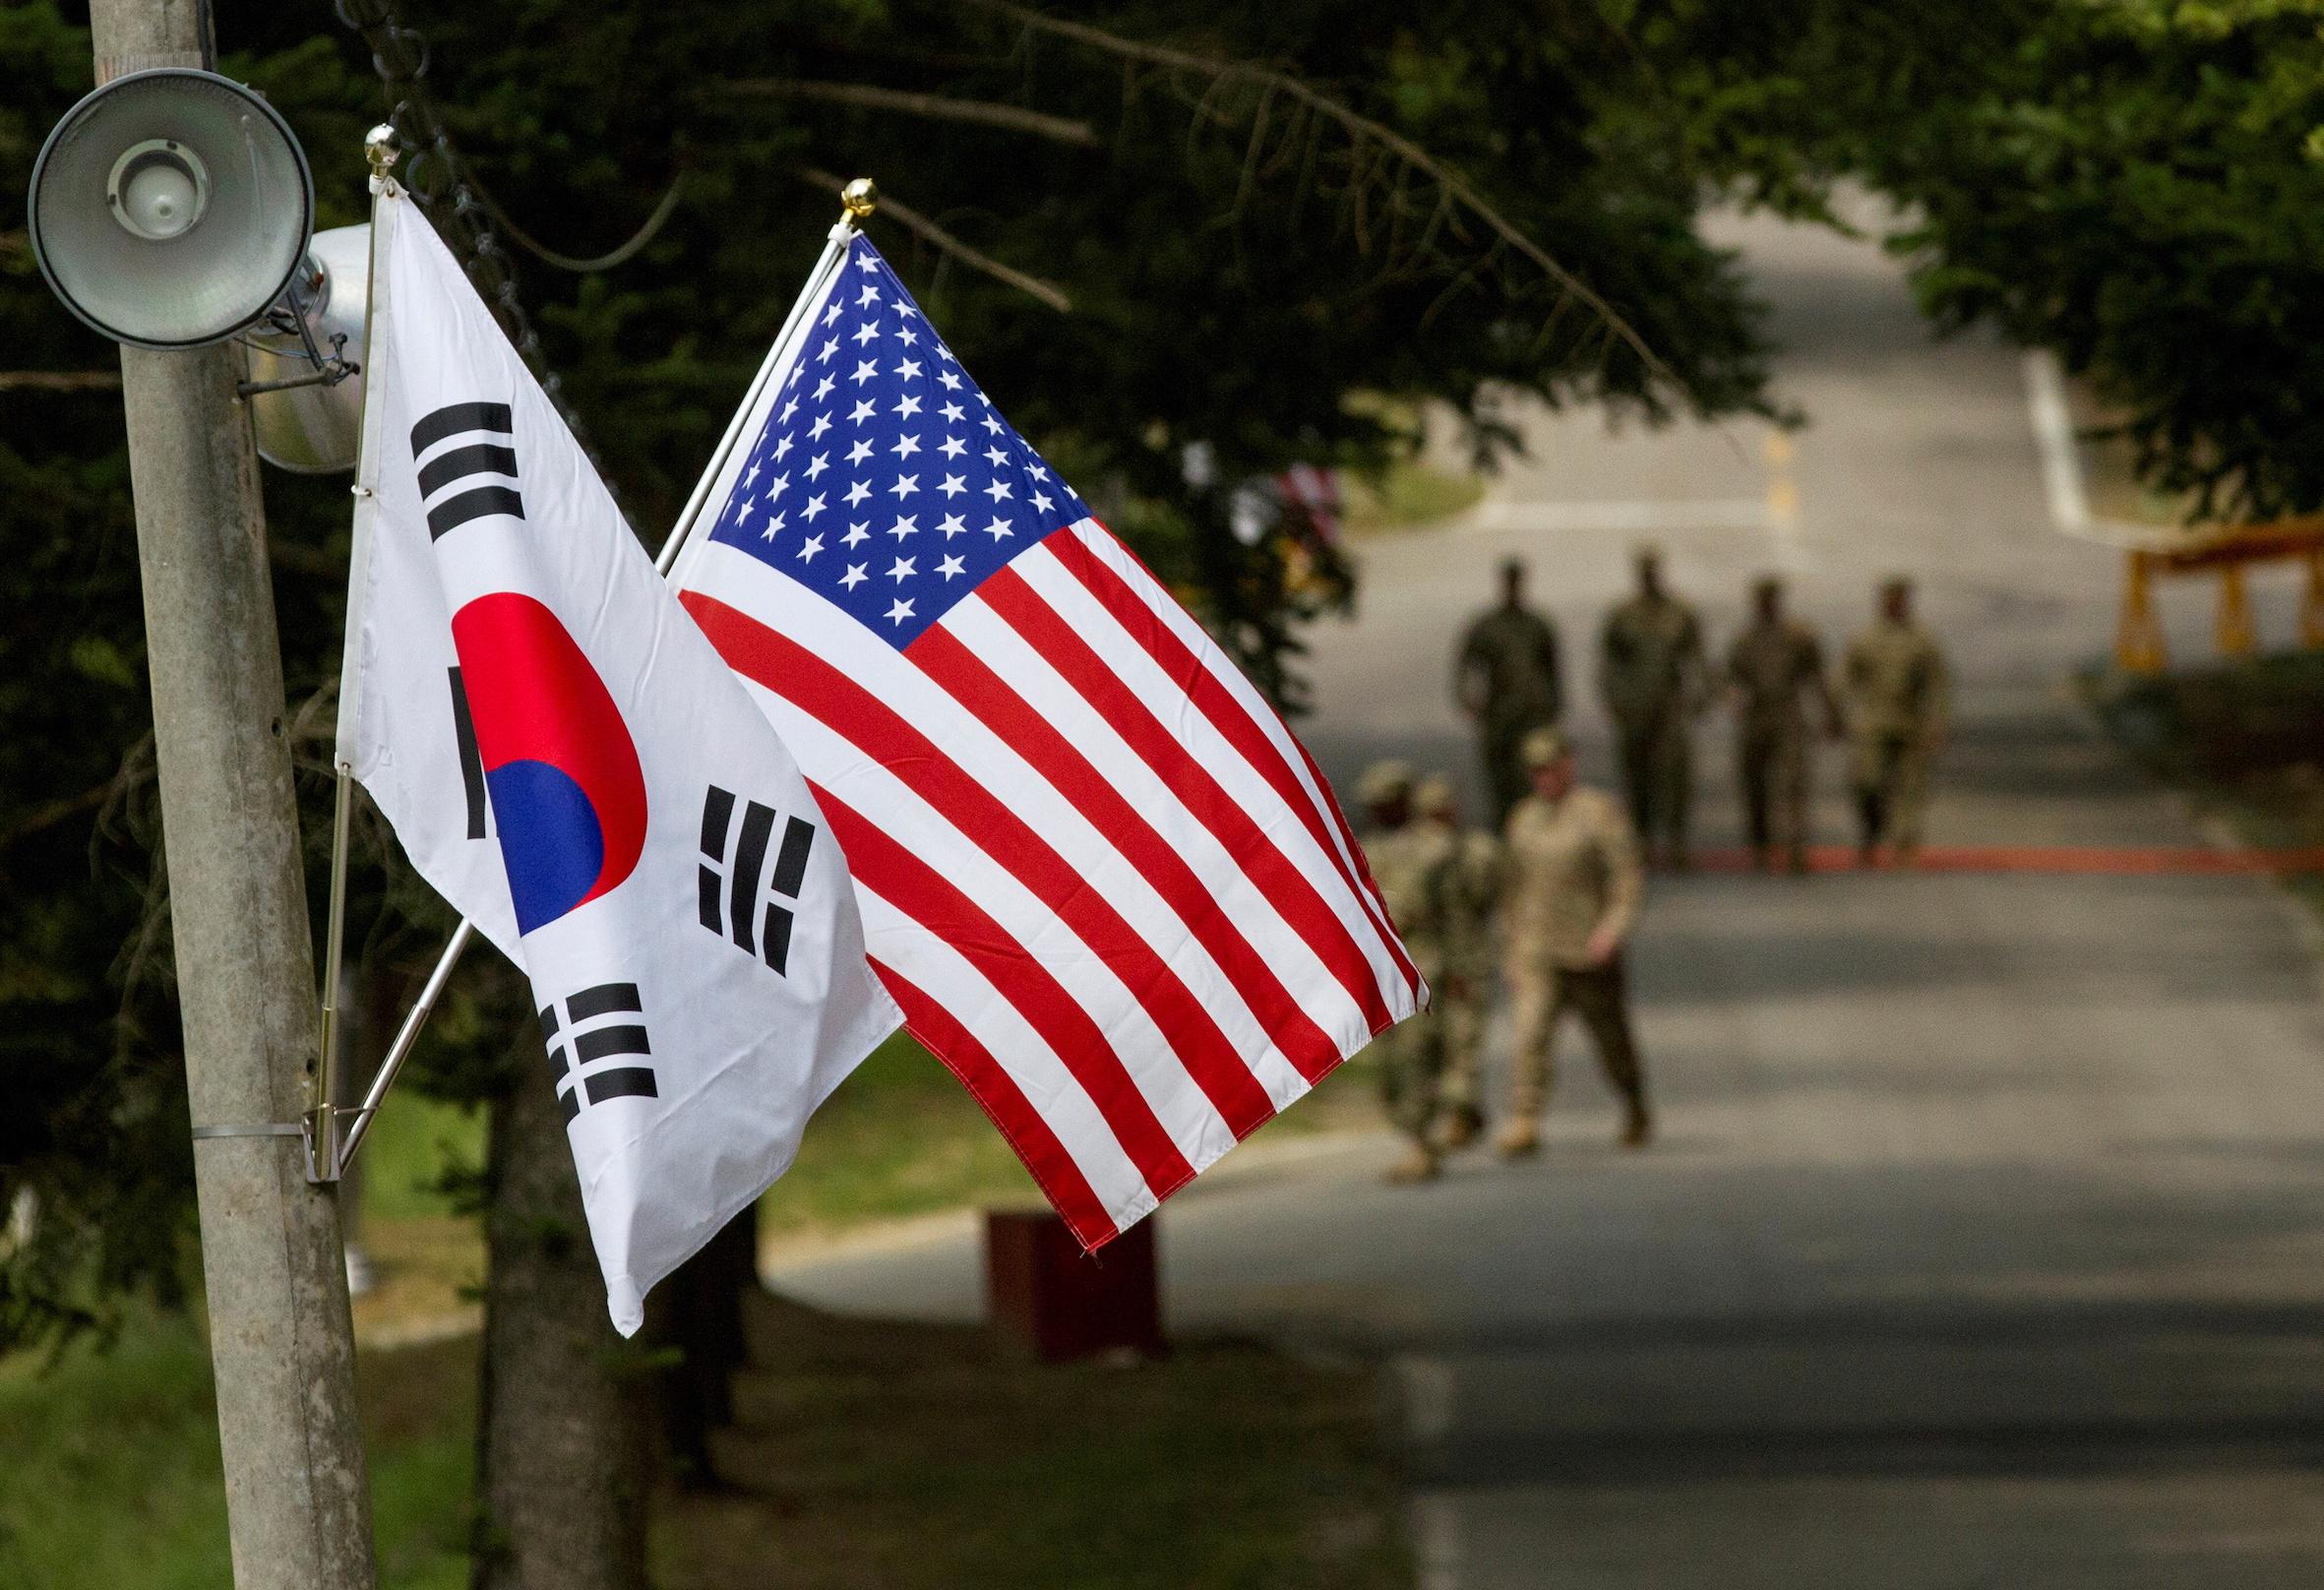 South Korea No decision on US drills, but exercises should not create